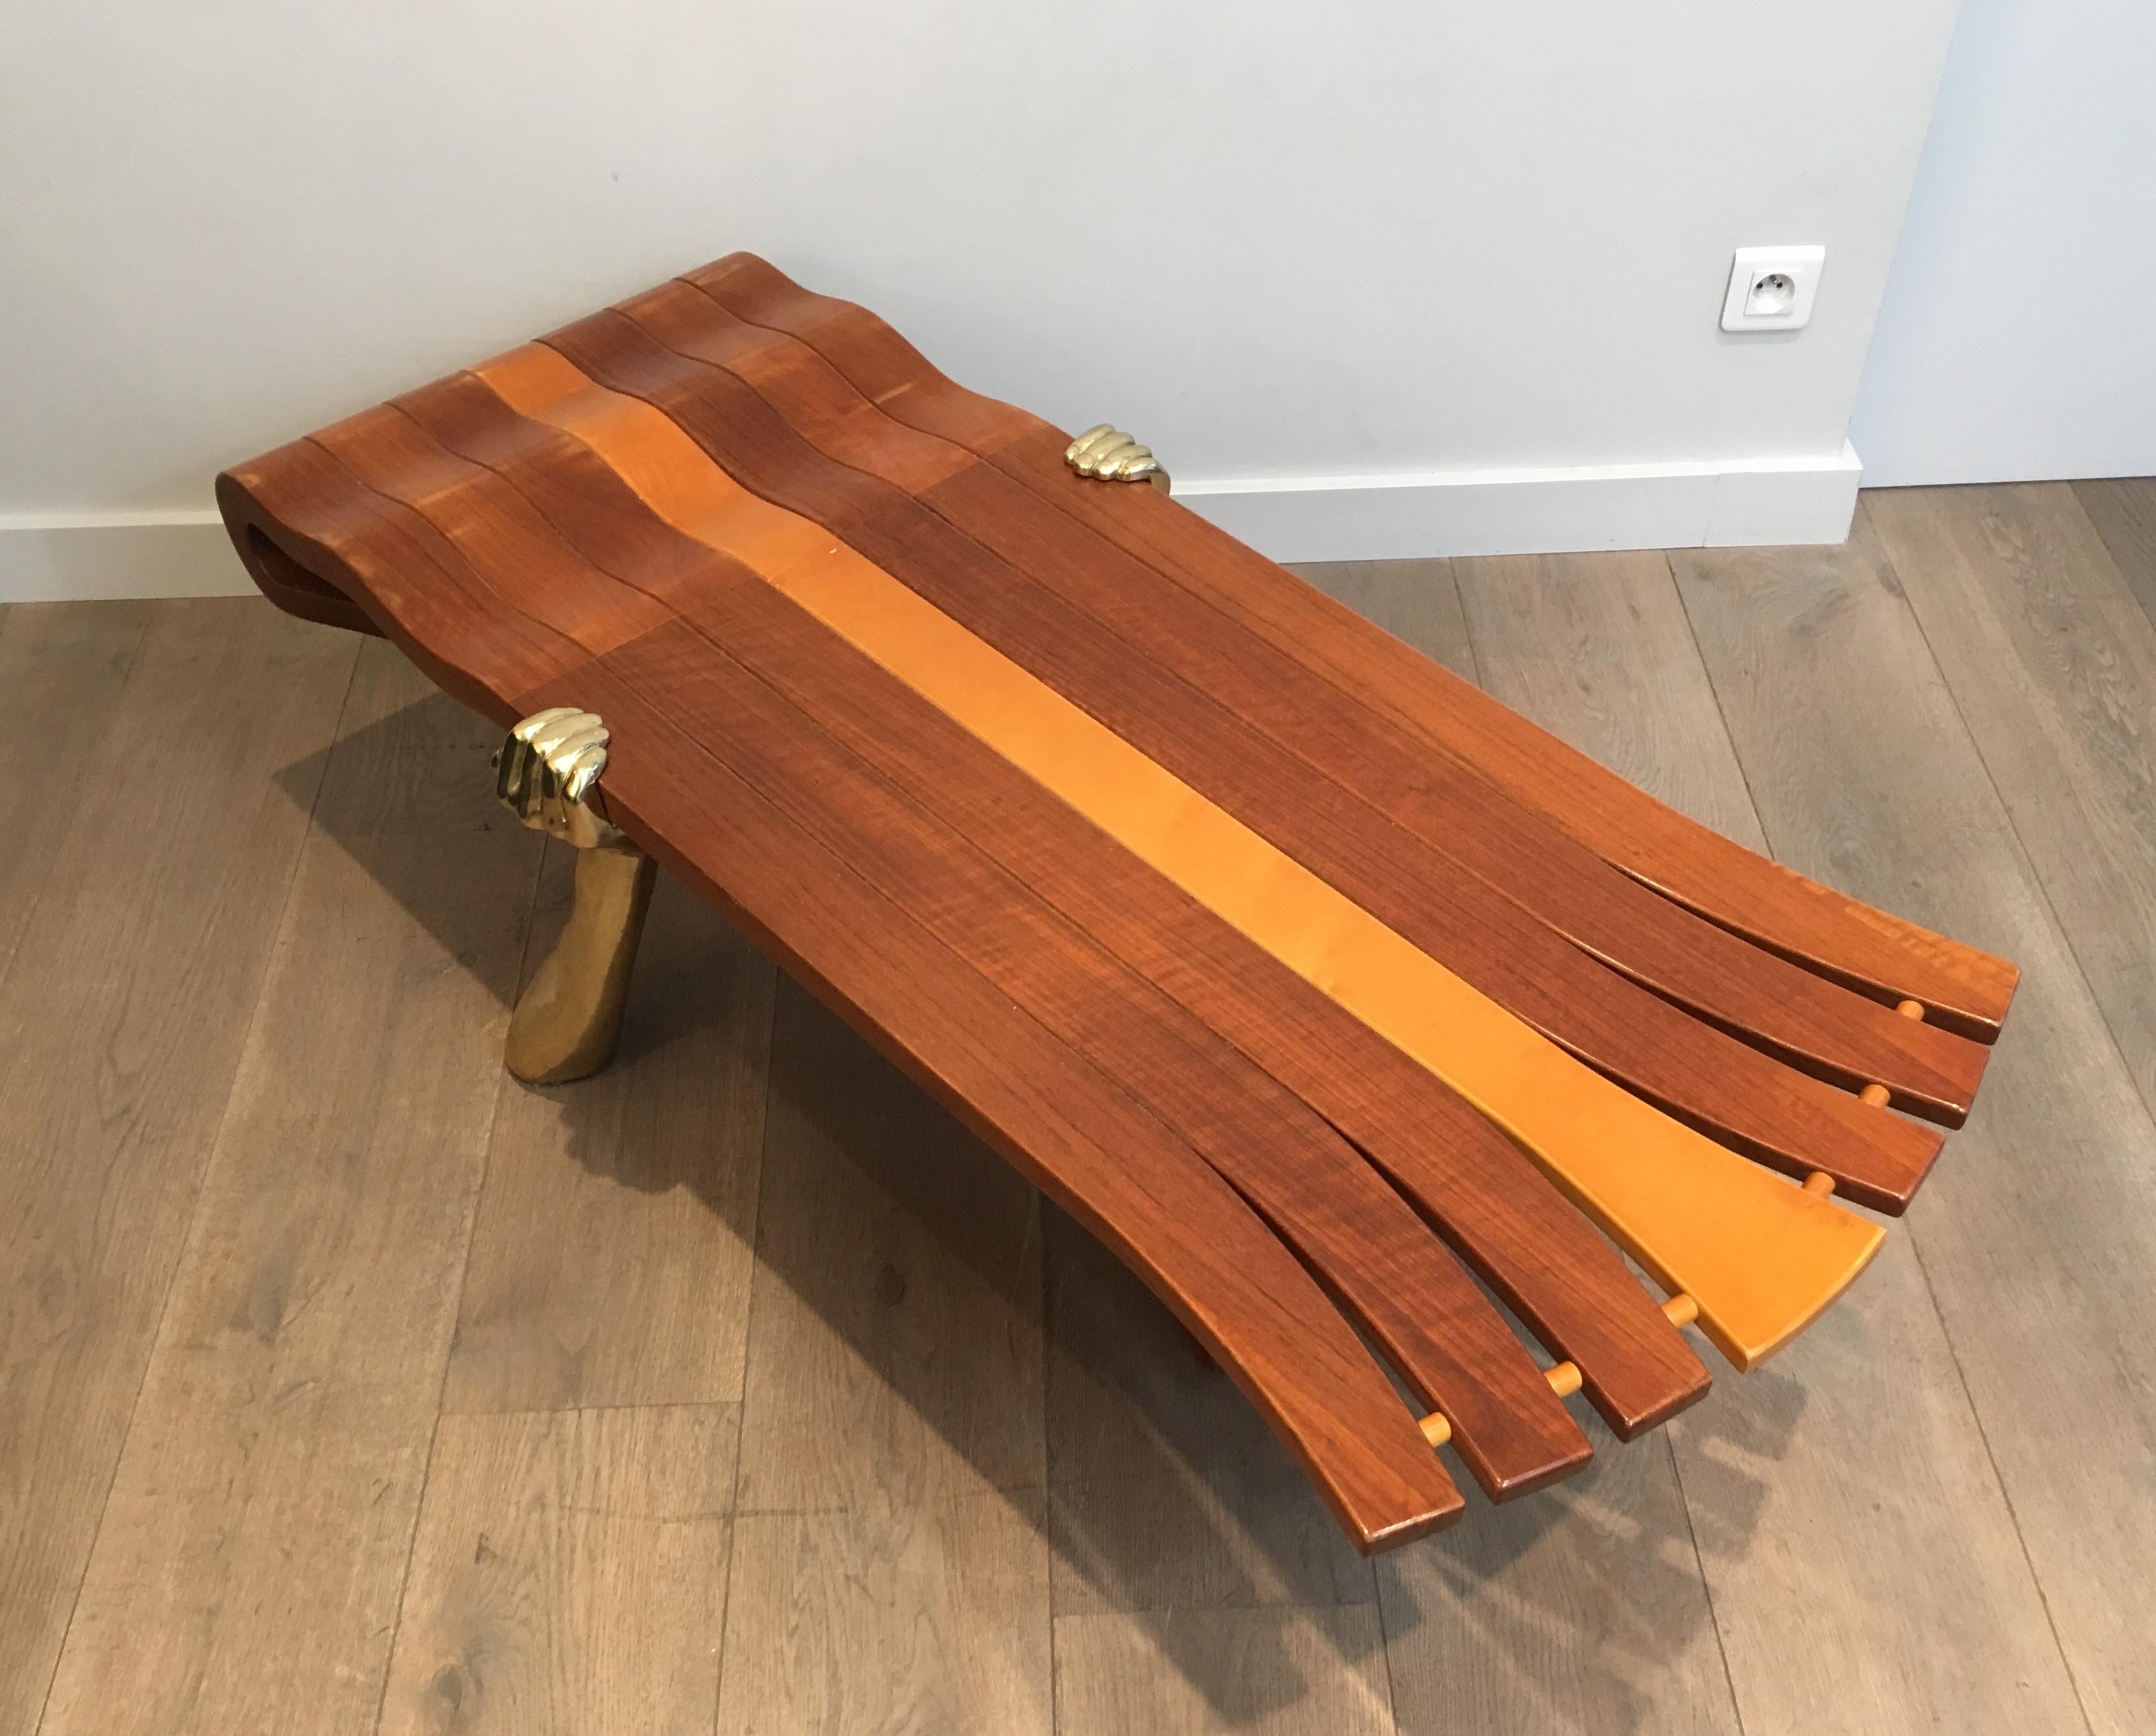 This very nice and unique coffee table is made of a thick freeform wooden top supported by 2 gilt brass arms. This is a very nice quality French work, circa 1970.